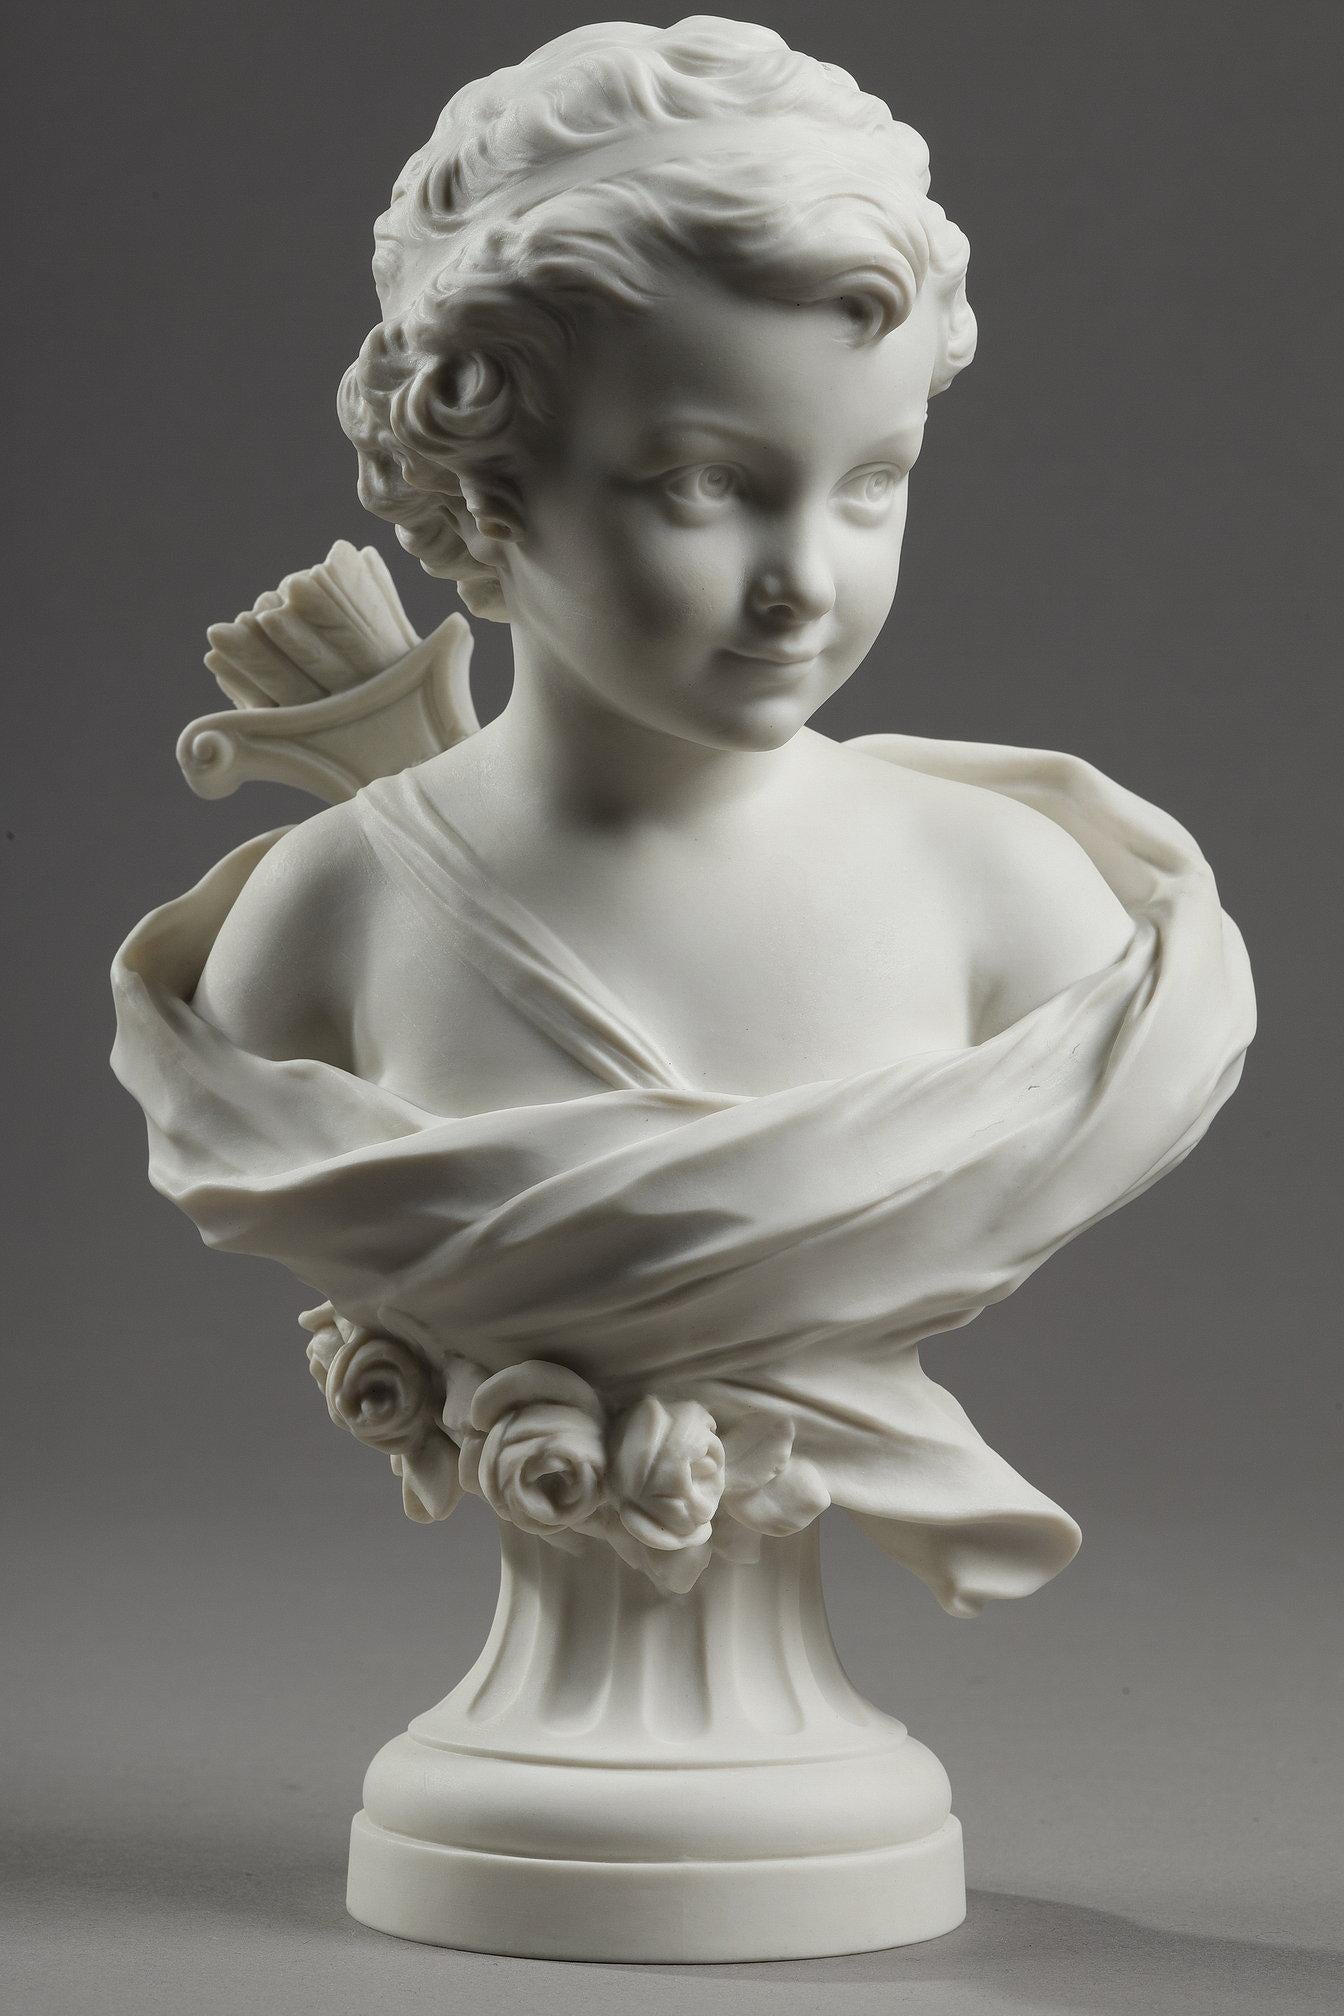 Small bust of Cupid in biscuit signed Agathon Léonard (1841-1923) and stamped Manufacture de Sèvres, dated 1926. It depicts a young putto carrying a quiver on his back. A drape covers the cupid's shoulders. The sculpture's circular base is fluted